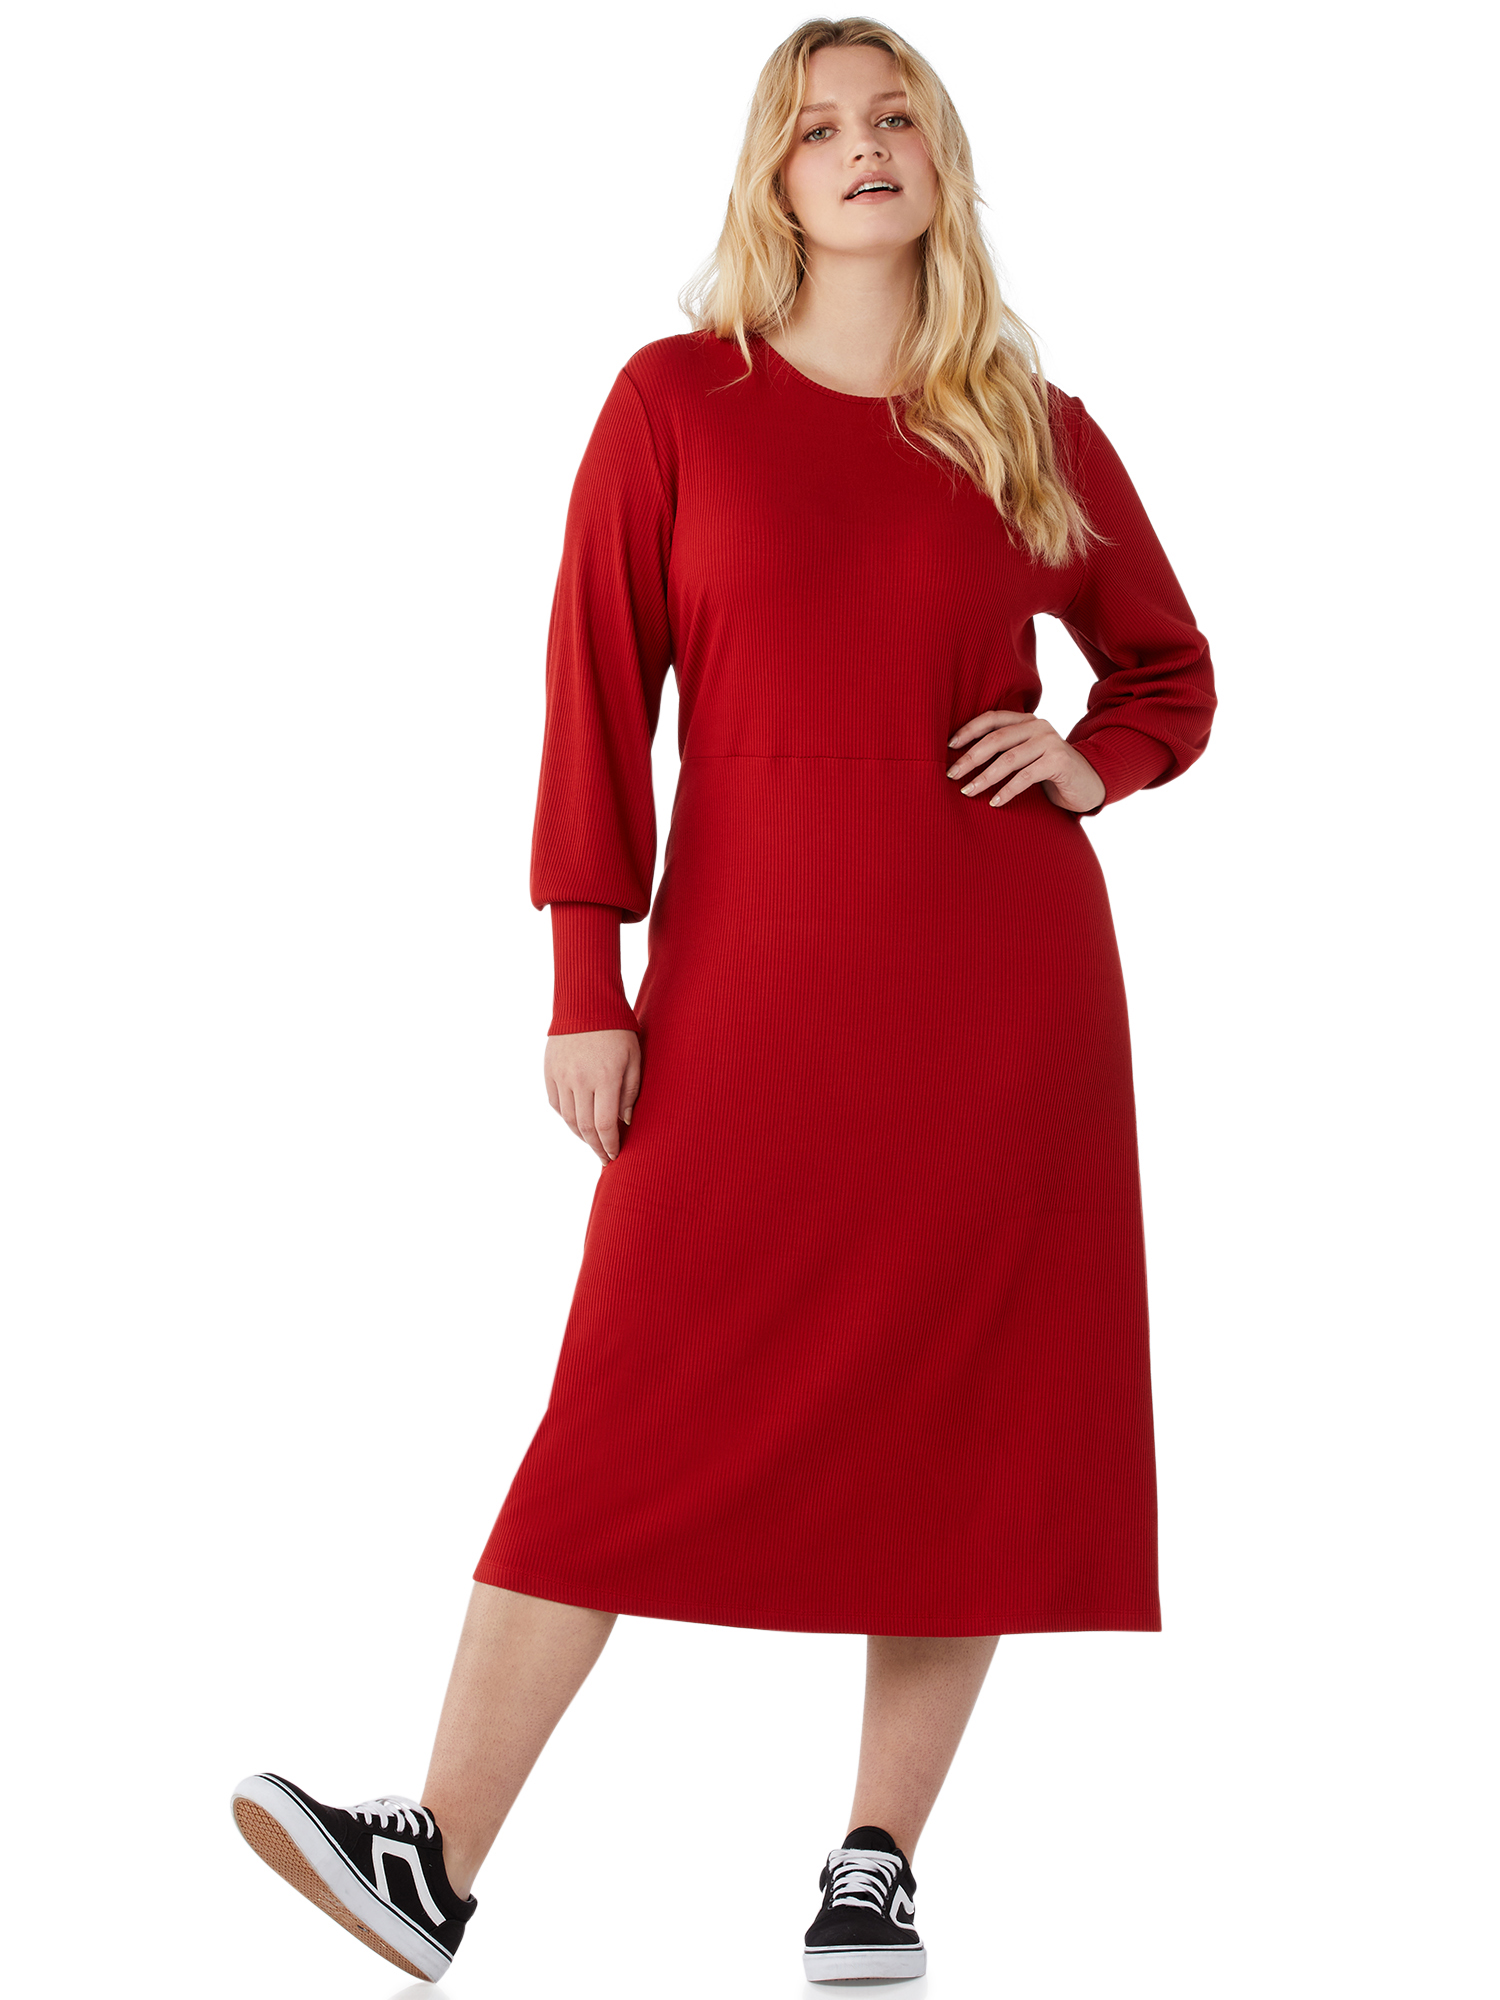 Free Assembly Women’s Fit & Flare Rib Knit Dress - image 4 of 6